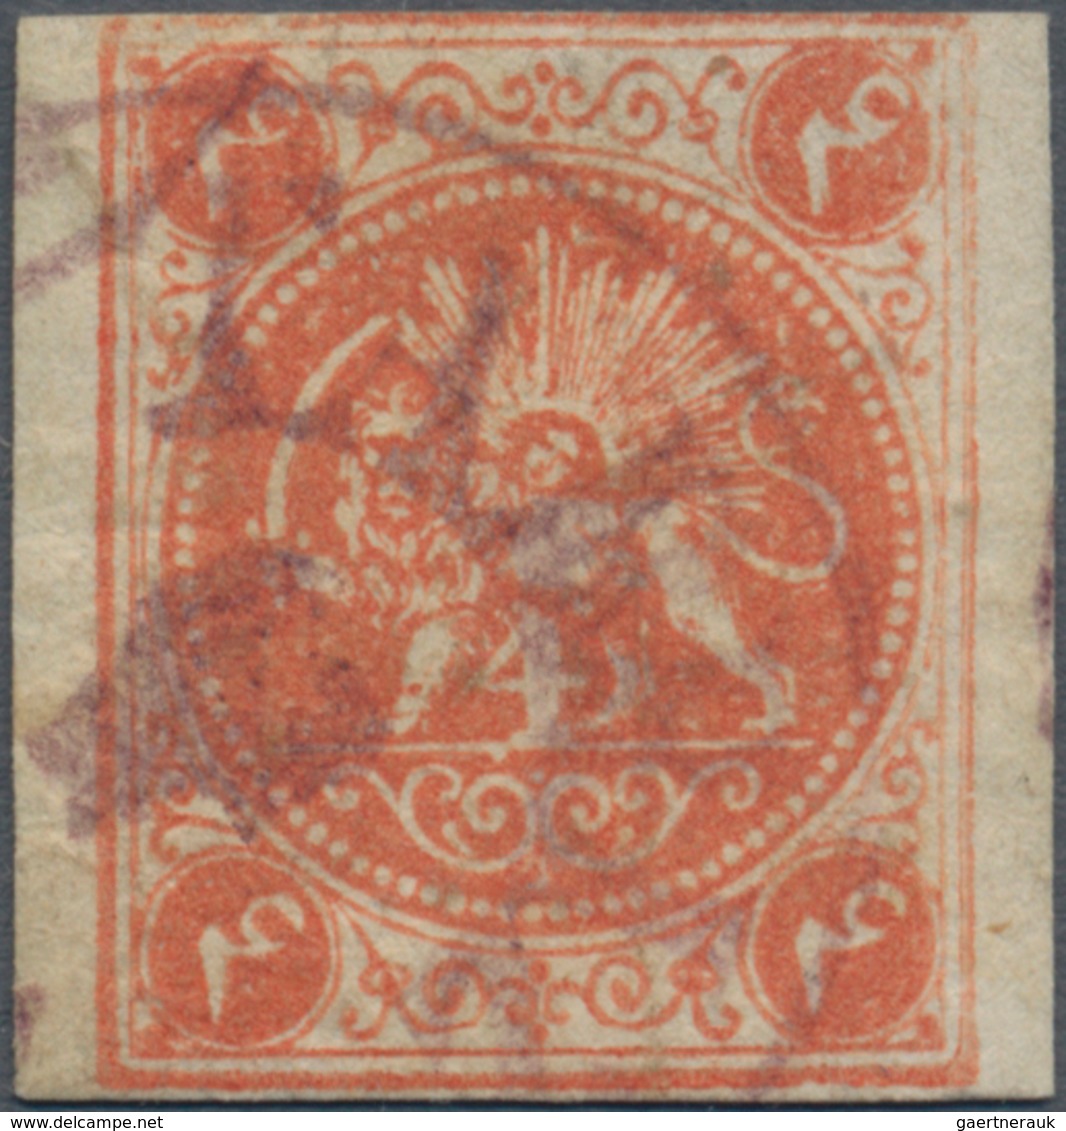 Iran: 1875, Rouletted Lion Issue, 4ch. Orange-red, Type B, Postally Used "TABRIZ", Signed And Opinio - Iran